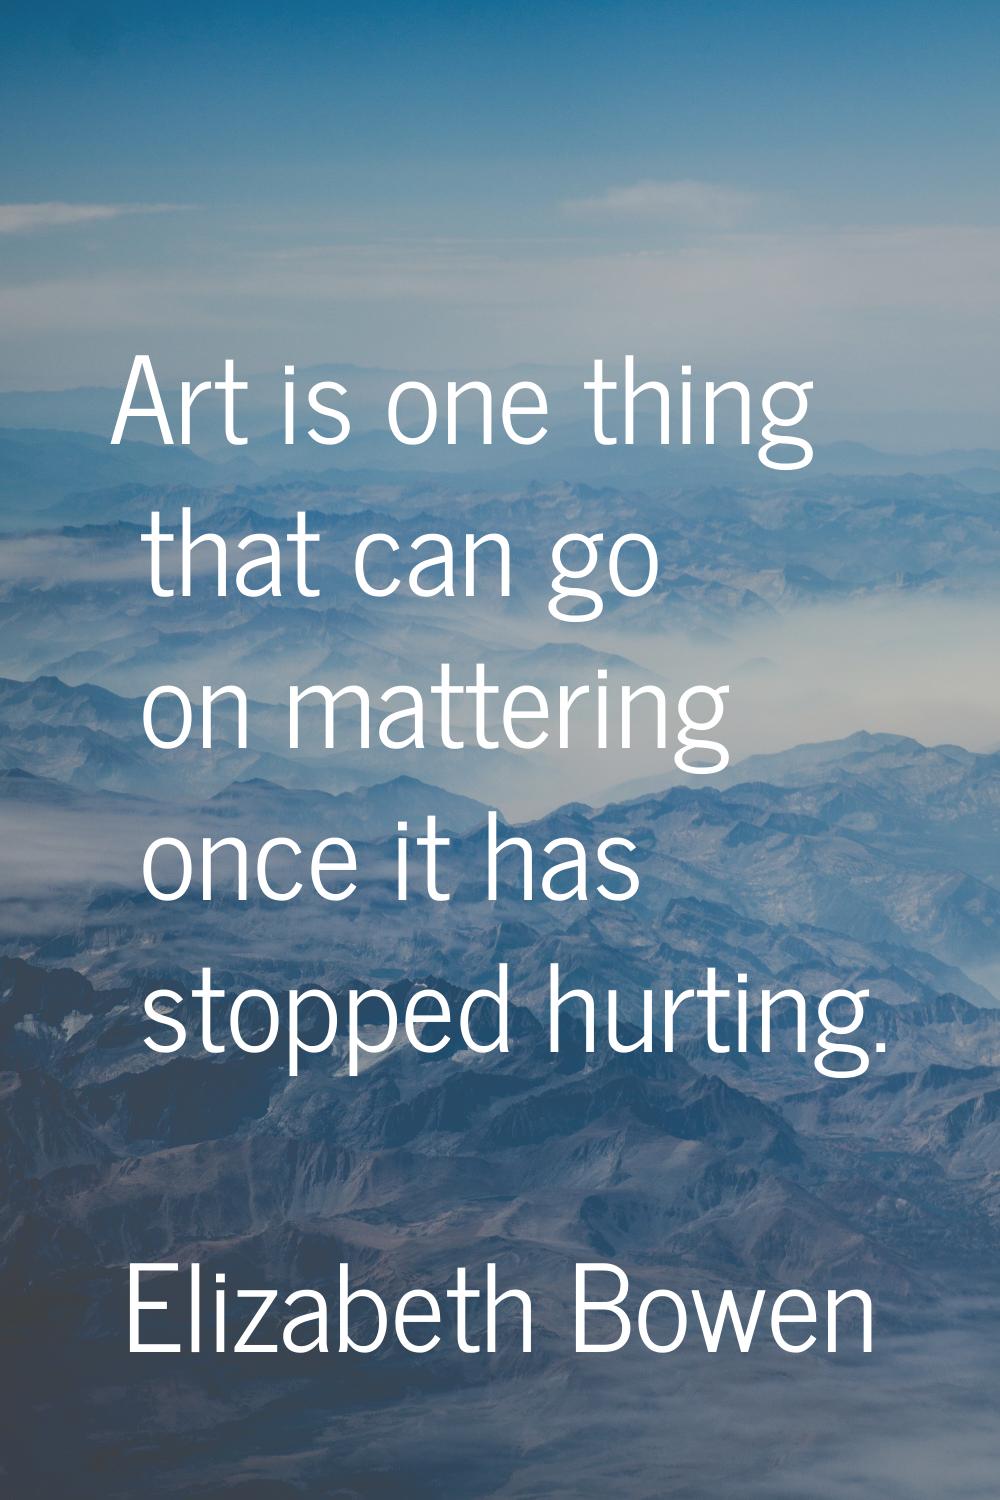 Art is one thing that can go on mattering once it has stopped hurting.